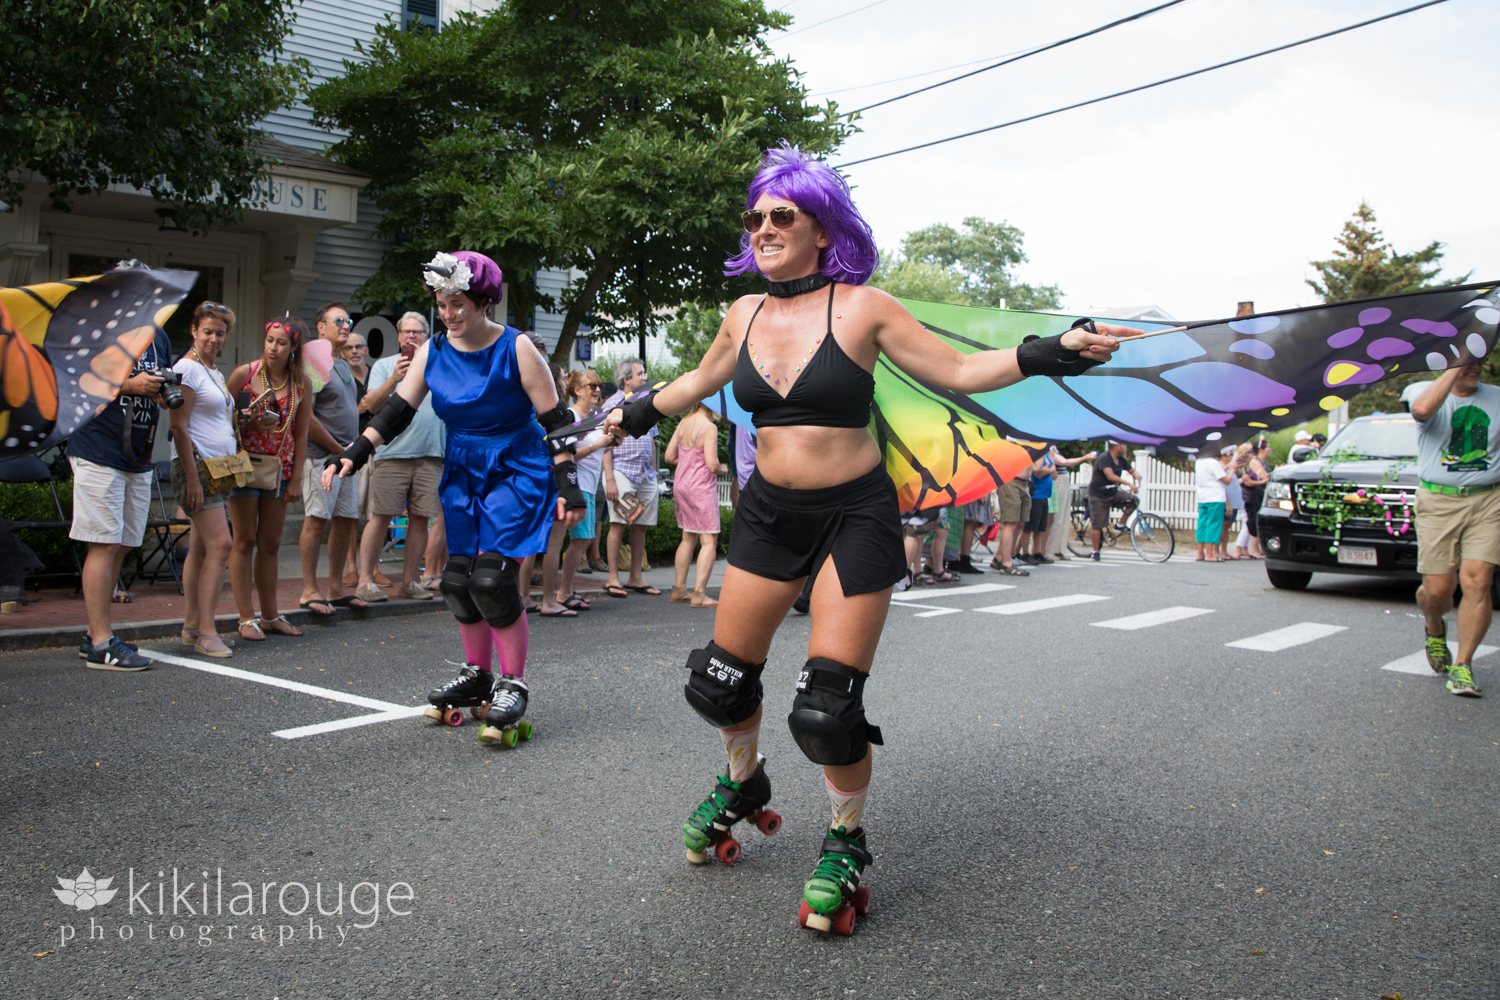 Roller derby woman with purple wig in parade